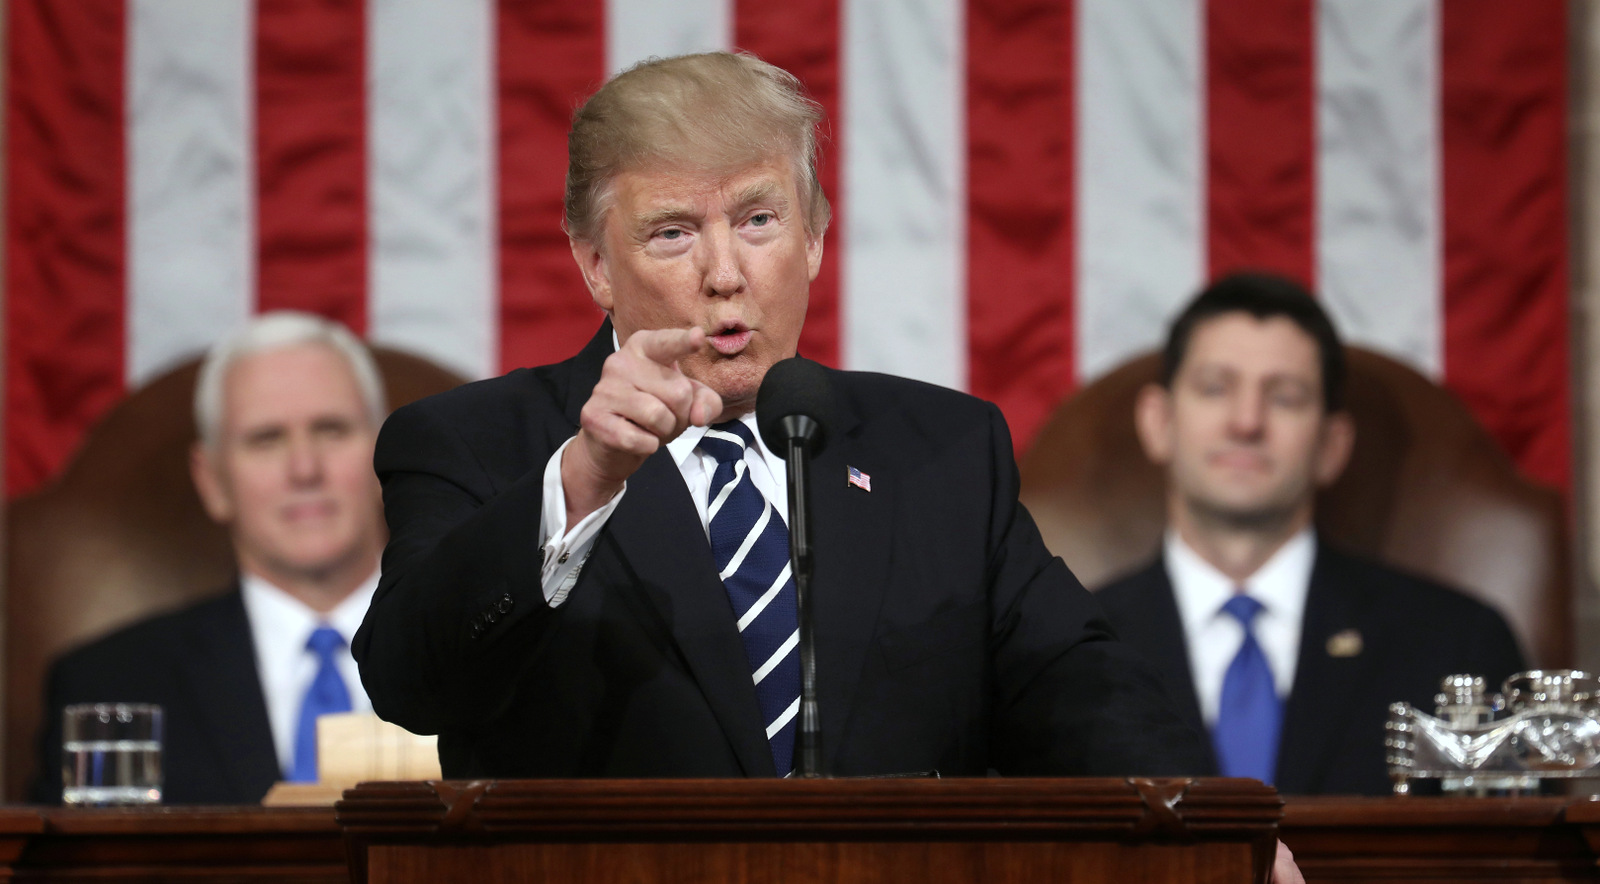 Donald Trump addresses a joint session of Congress on Capitol Hill in Washington, Feb. 28, 2017. (Jim Lo Scalzo/AP)